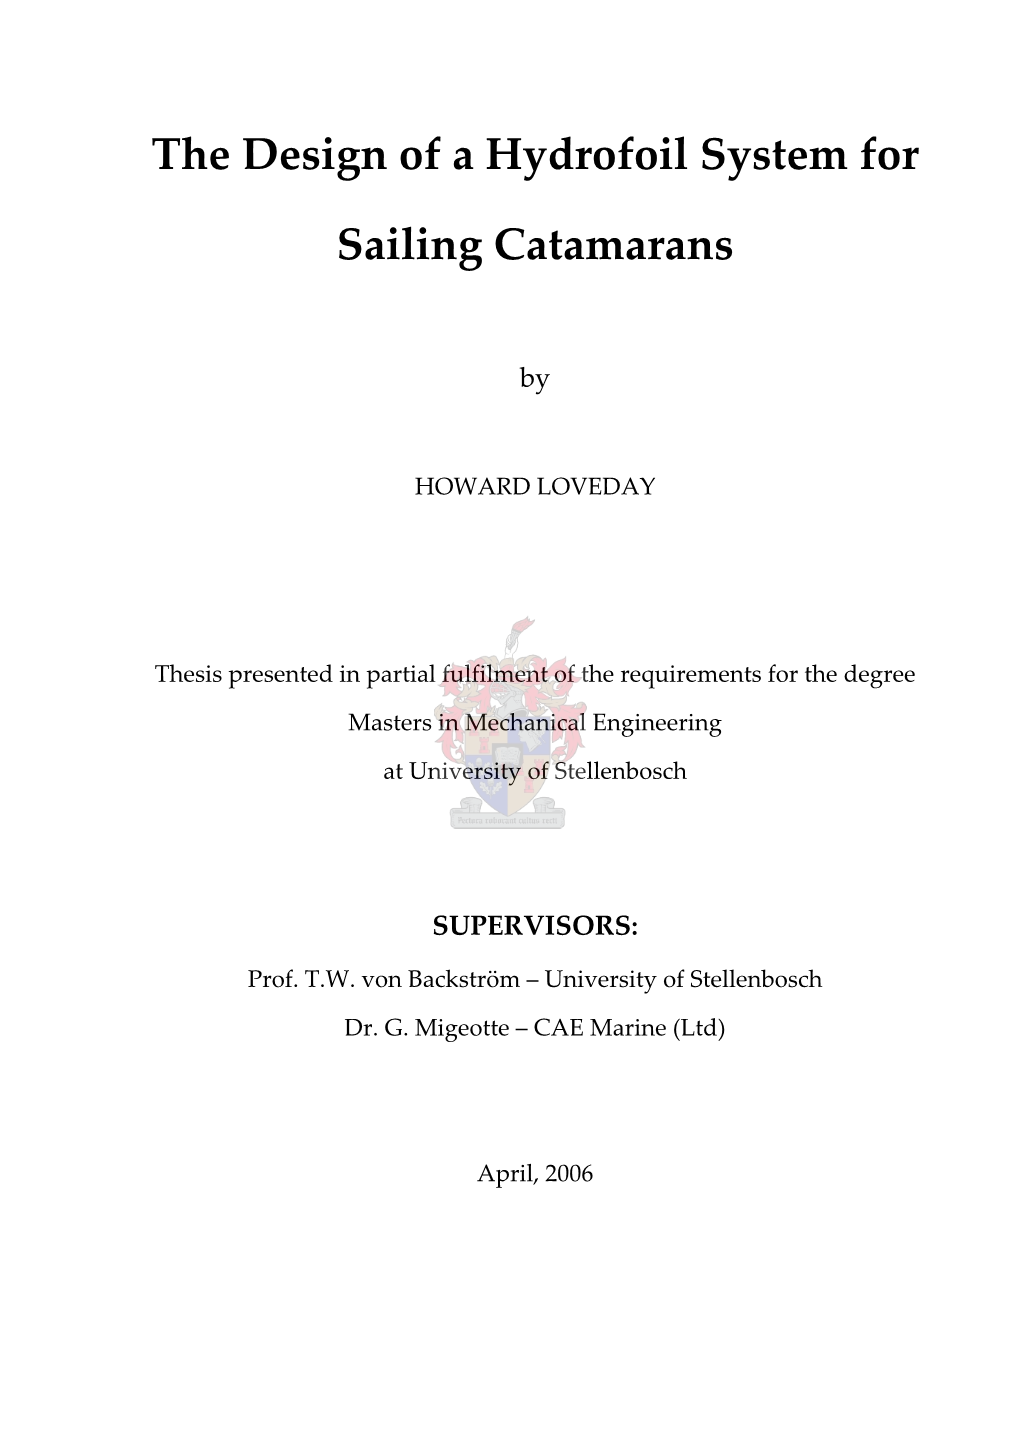 The Design of a Hydrofoil System for Sailing Catamarans